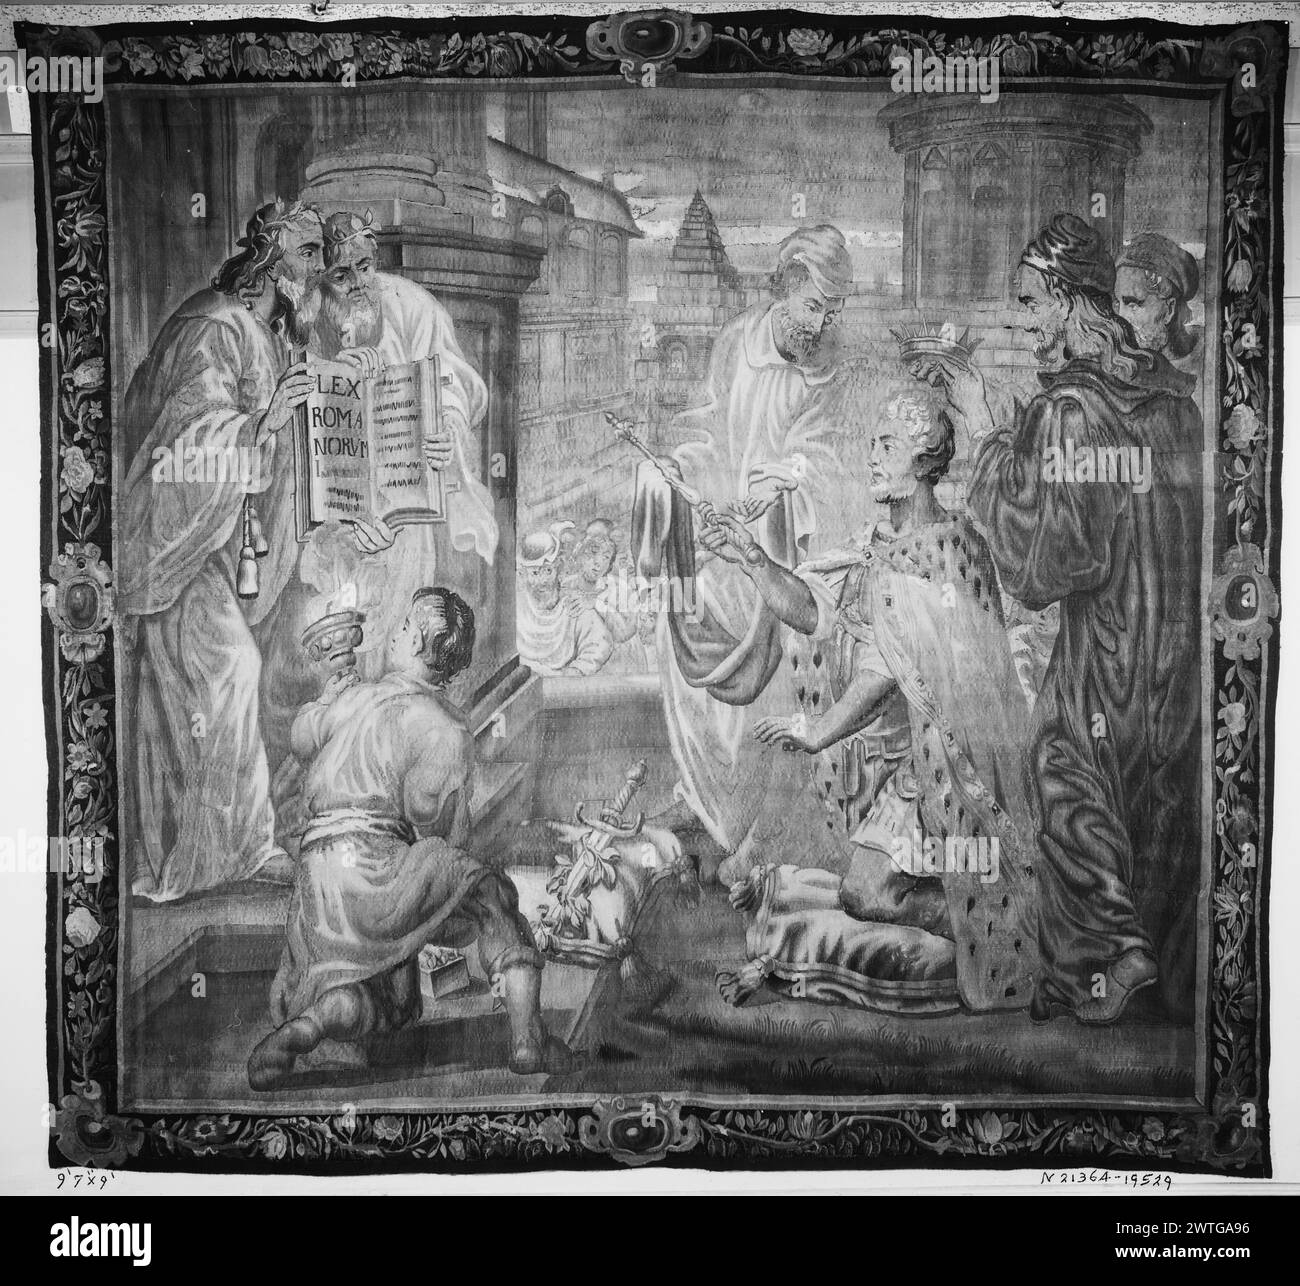 Crowning of emperor. unknown c. 1670 Tapestry Dimensions: H 9' x W 9'7' Tapestry Materials/Techniques: unknown Culture: Flemish Weaving Center: Antwerp Ownership History: French & Co. received from Joseph Gillis, invoiced 8/18/1939; returned 7/17/1954. Marcus Aurelius kneels, before 2 men who hold open large book, while another man crowns him (BRD) twisting garland of flowers & fruit, empty central cartouches on each side Stock sheet states that this tapestry is English. French & Co. stock sheet in archive, 19529 Stock Photo